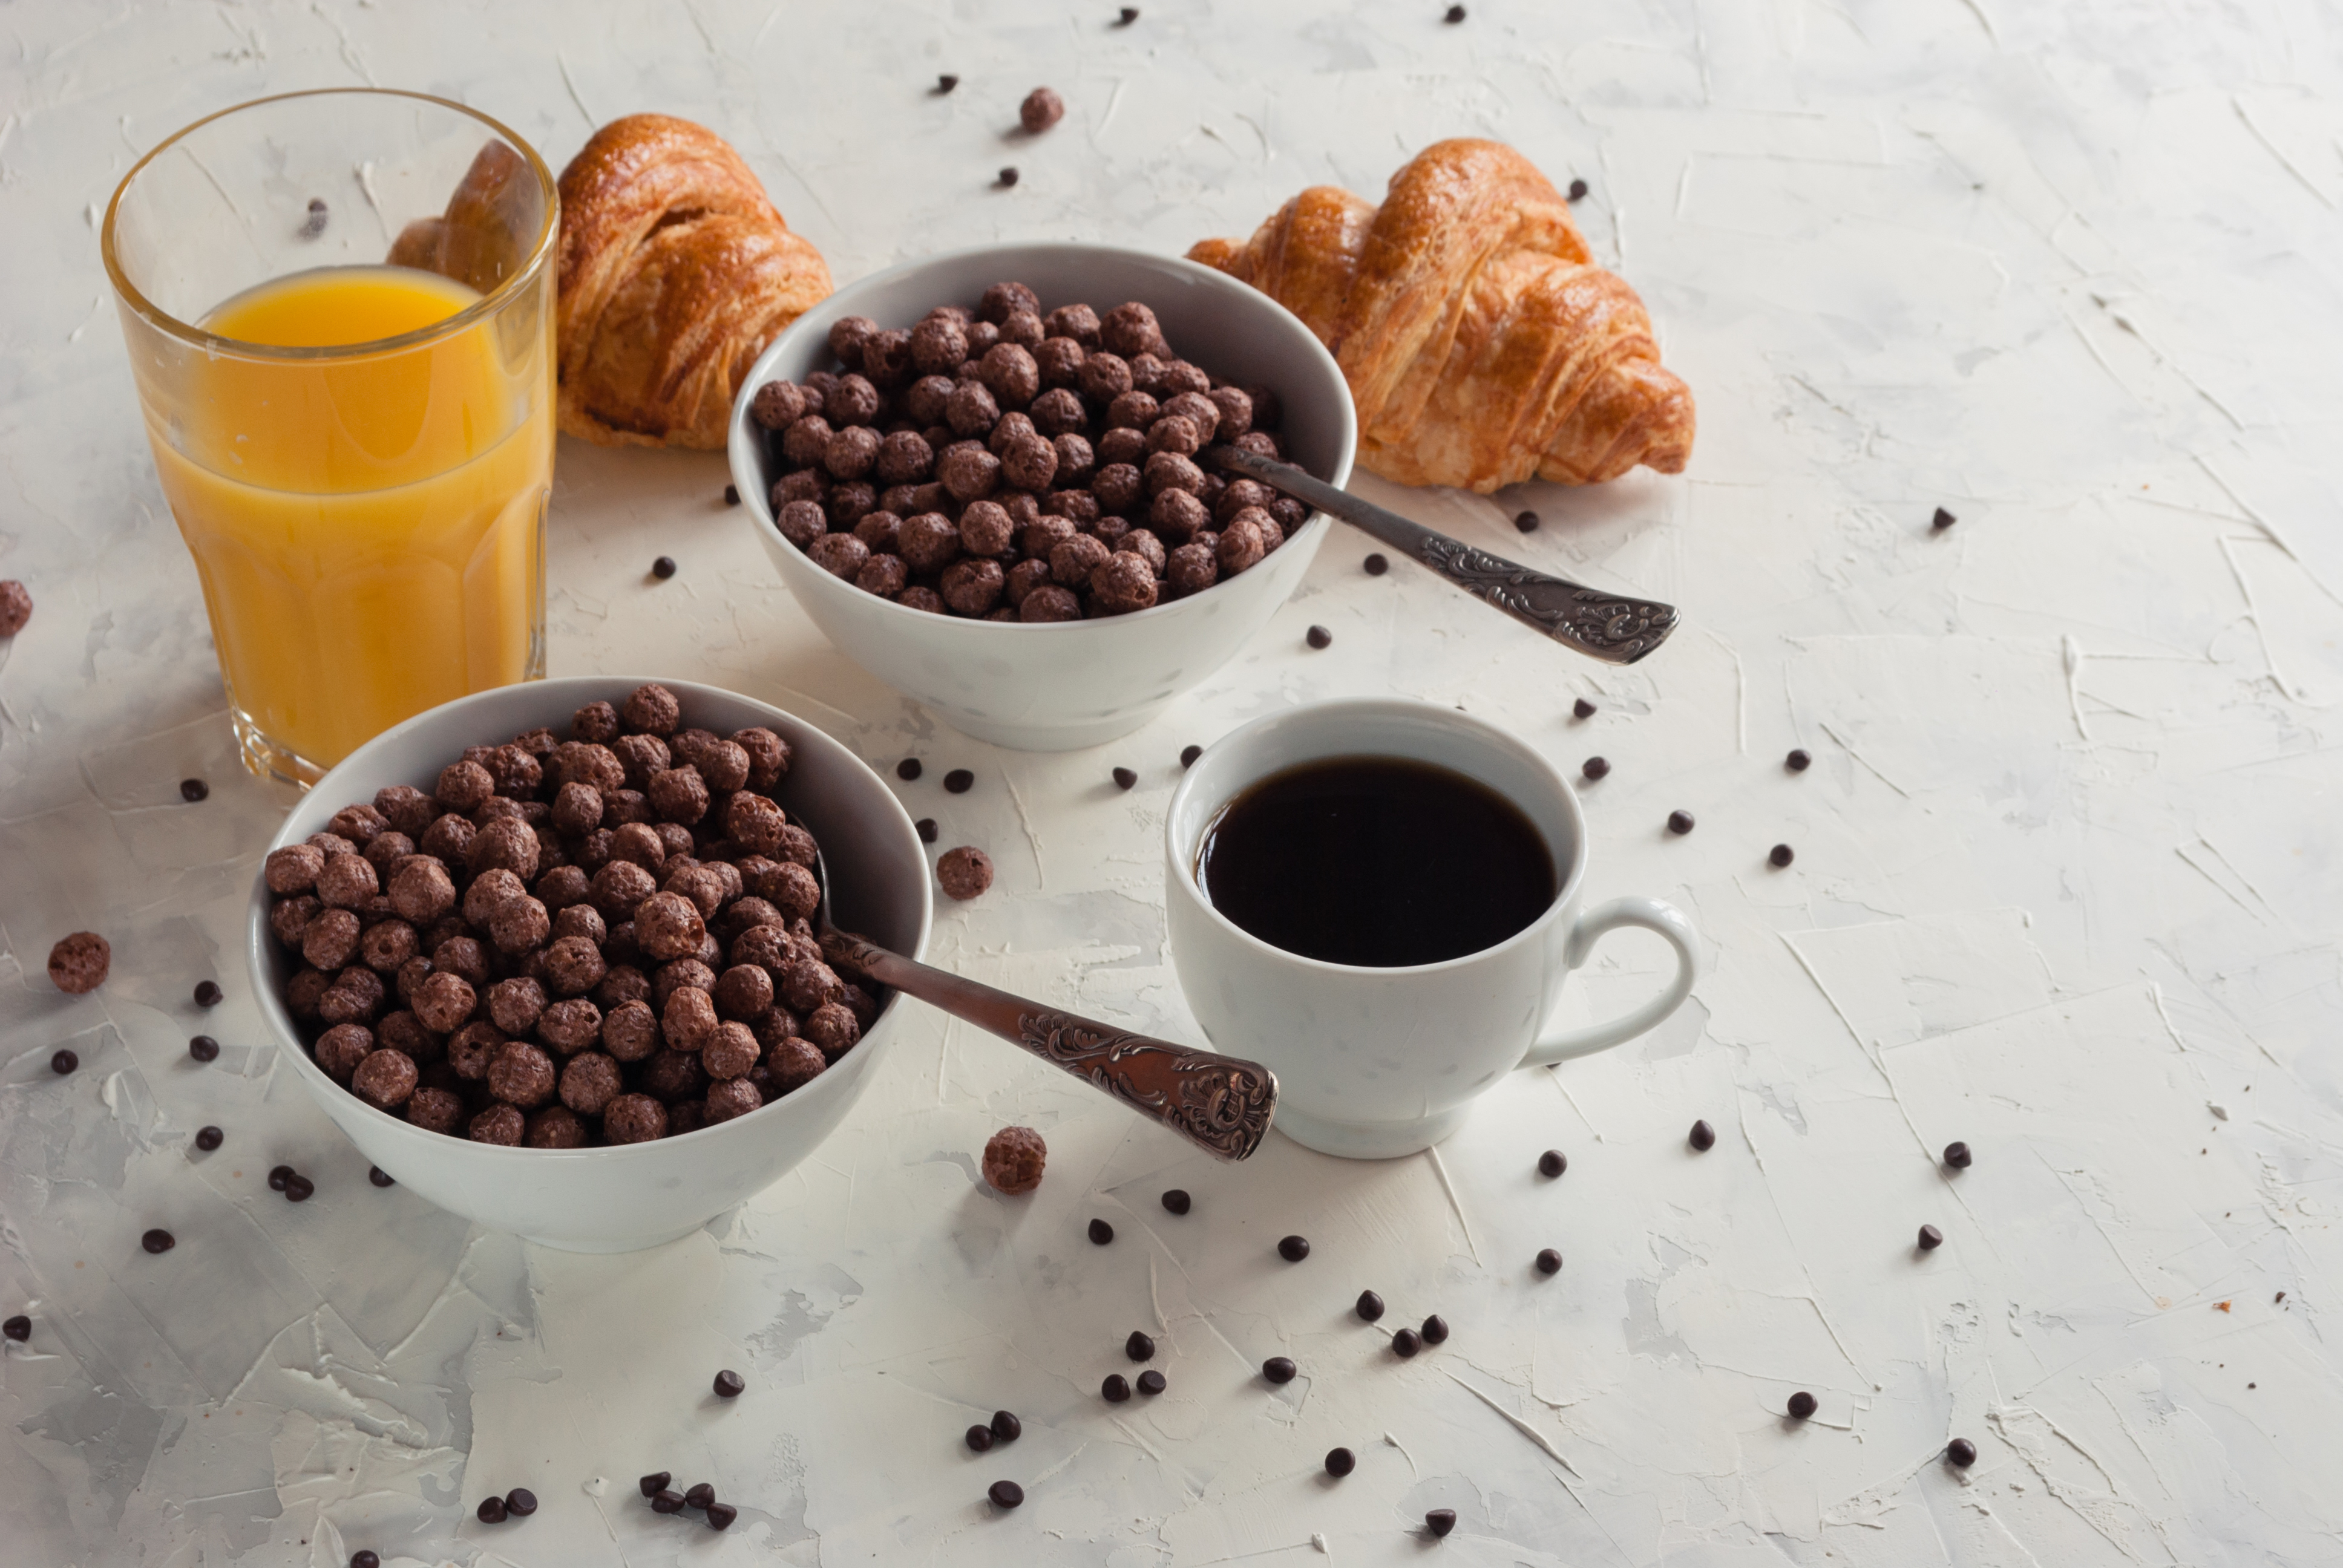 Breakfast Cereal Coffee Cup Still Life 3872x2592